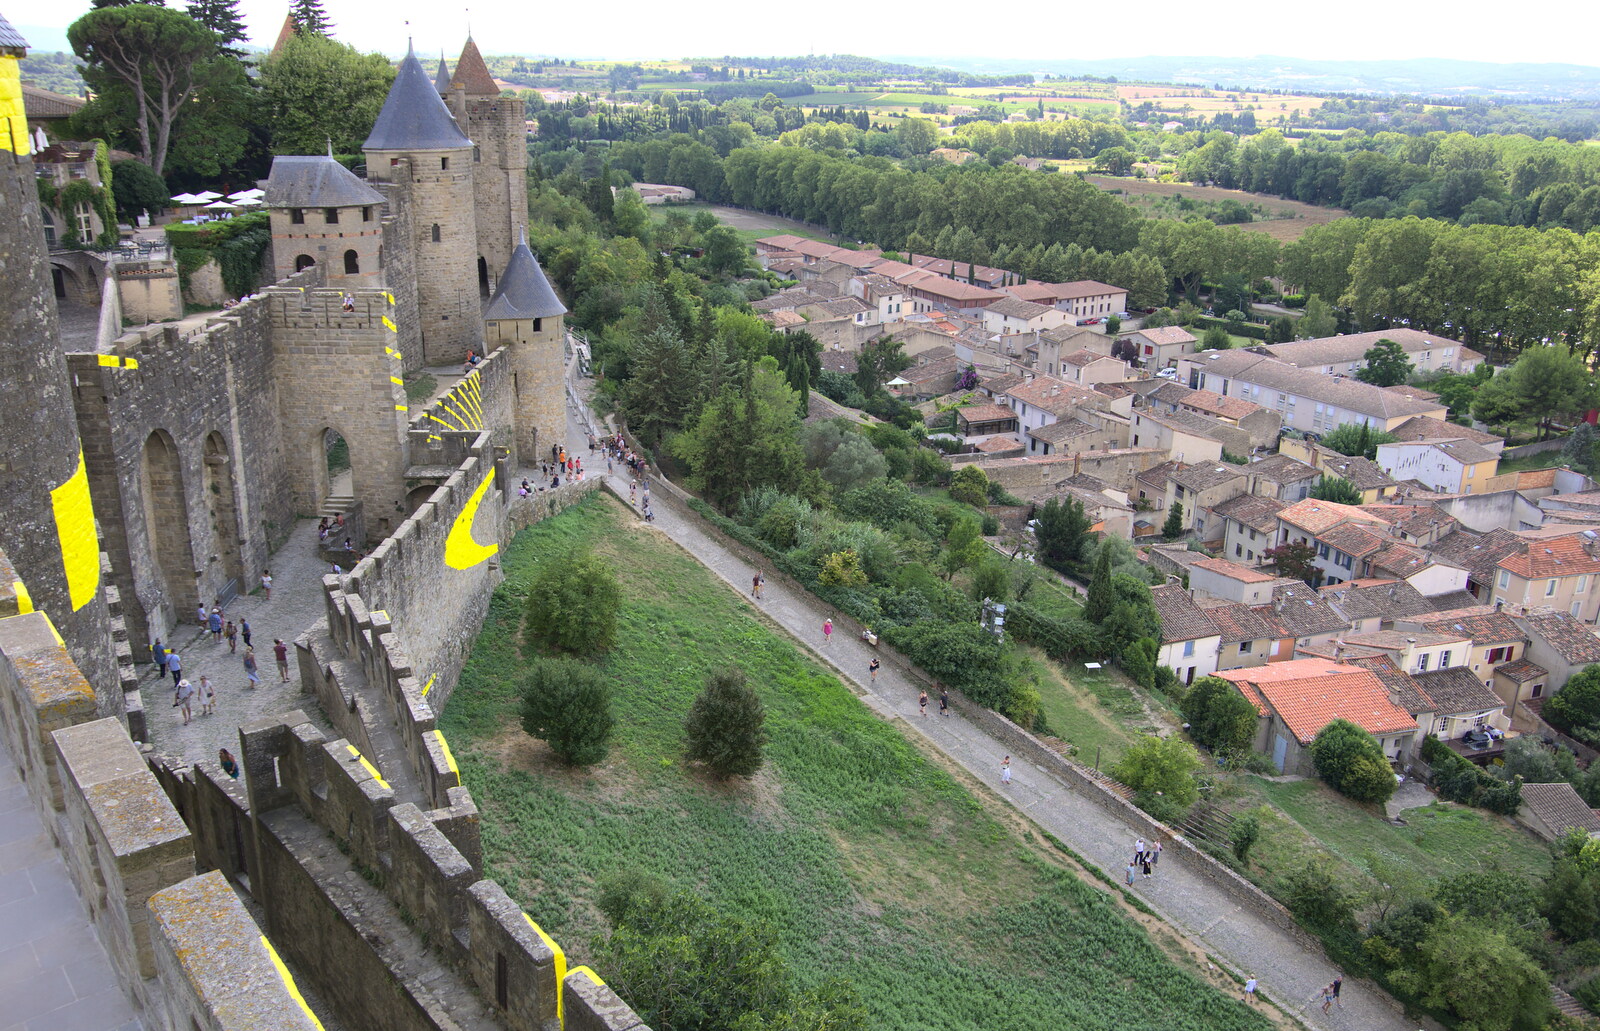 Looking down on the path up to the Porte d'Aude from The Château Comtal, Lastours and the Journey Home, Carcassonne, Aude, France - 14th August 2018